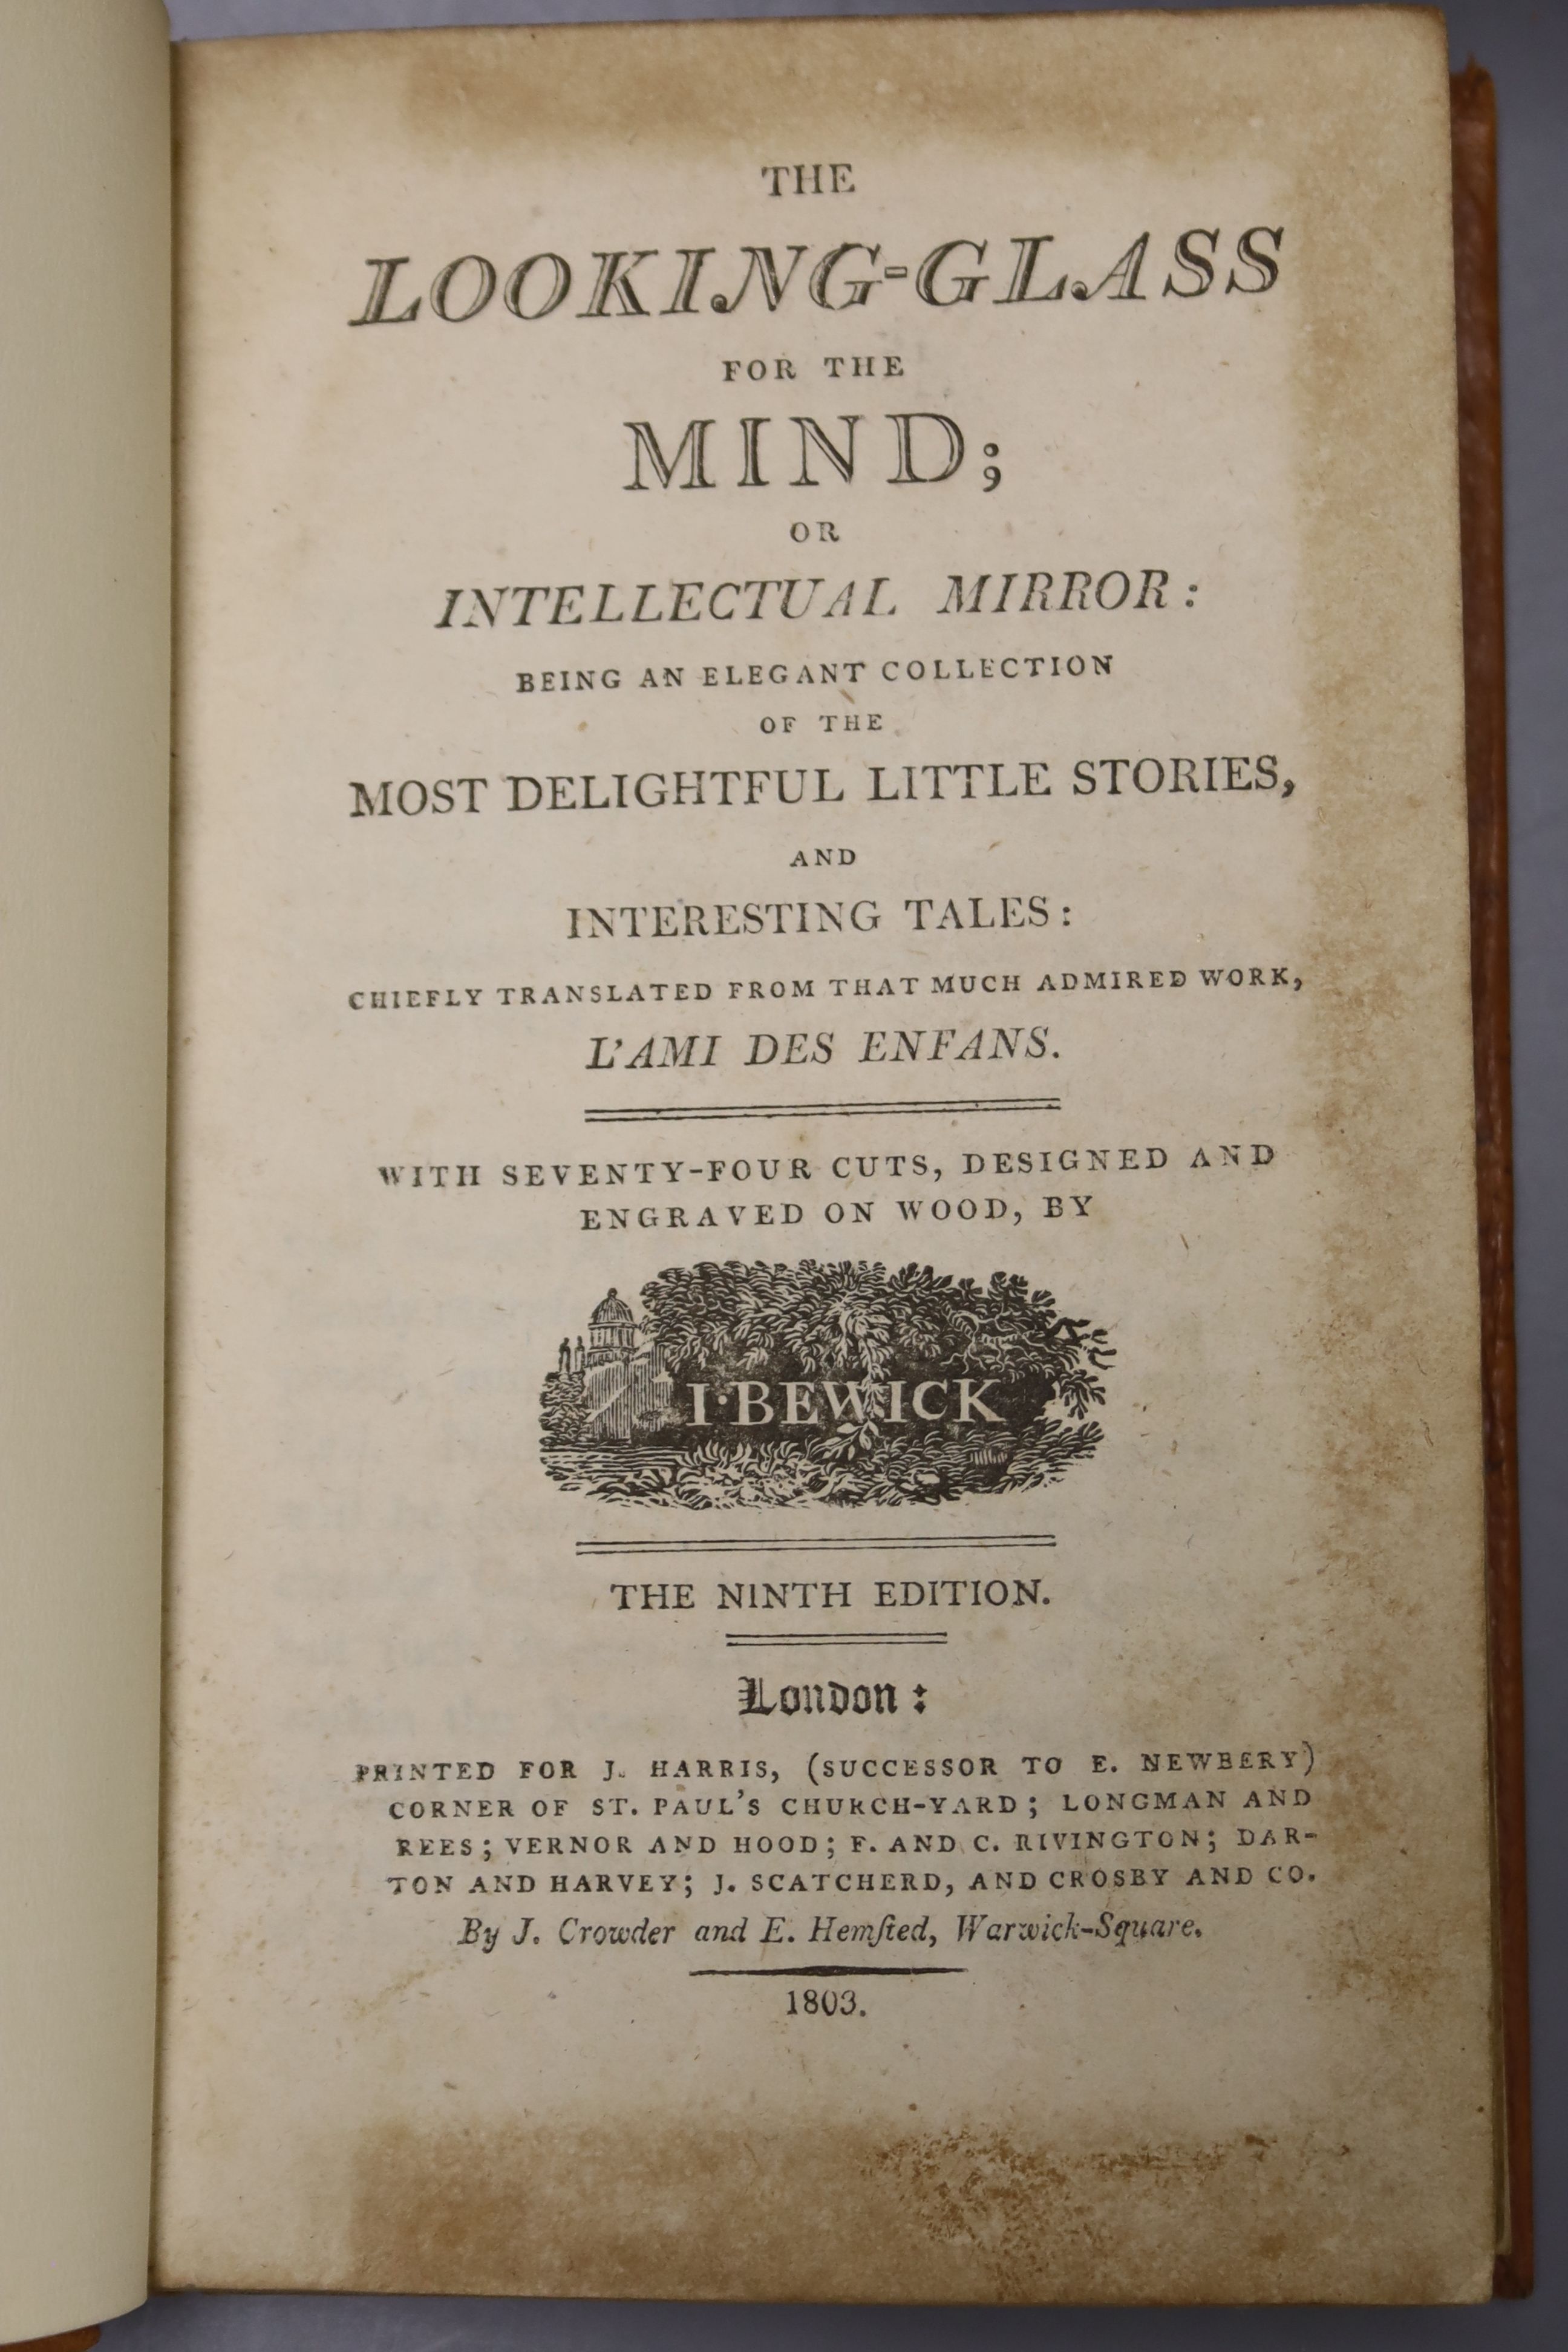 The Looking-Glass for the Mind; or Intellectual Mirror …, with seventy-four cuts, designed and engraved on wood, by I. Bewick, 9th edition